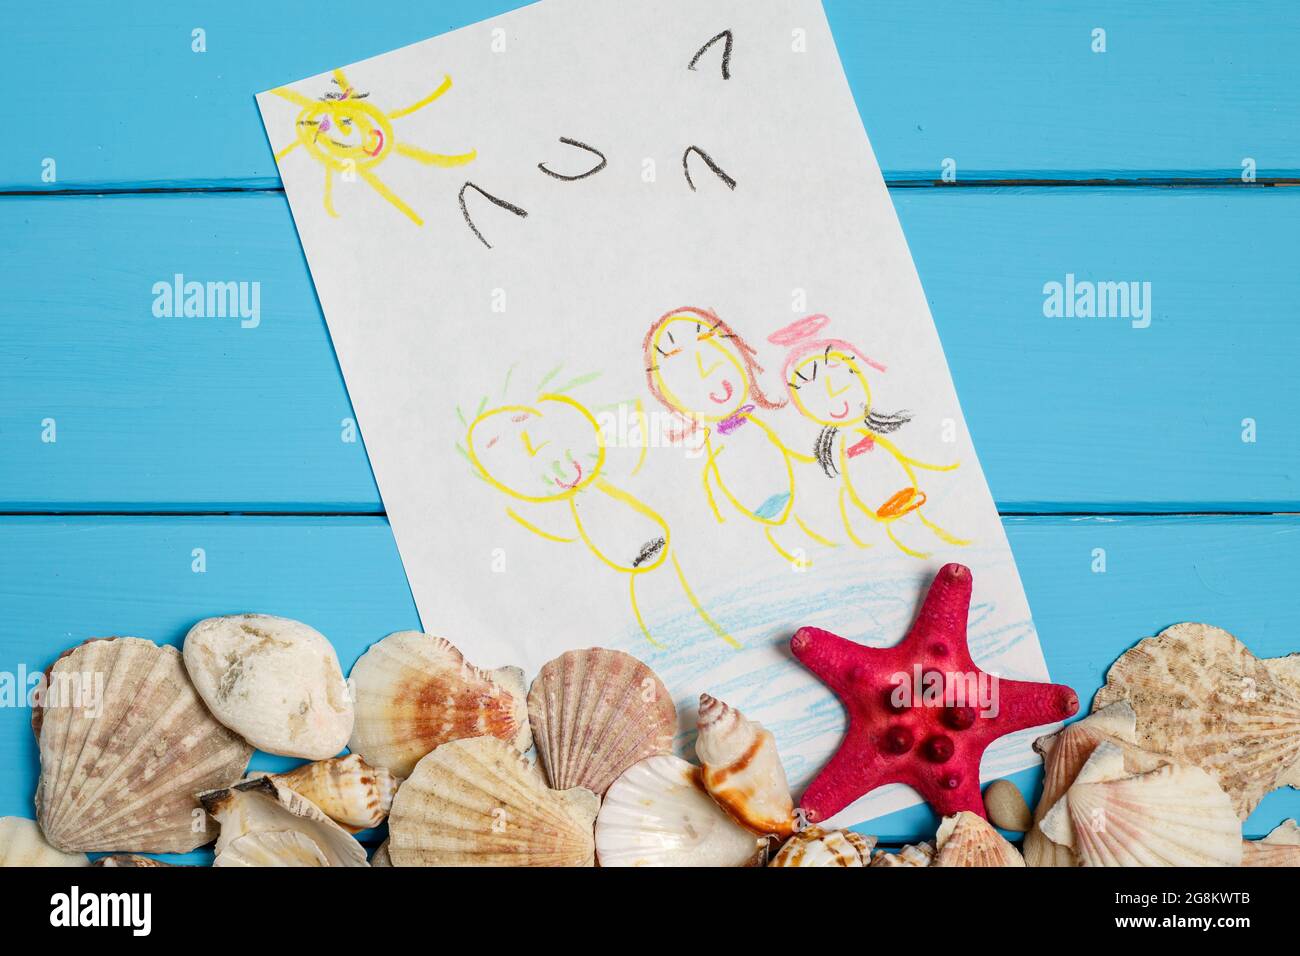 Summer background with the seashells and children's drawing Stock Photo